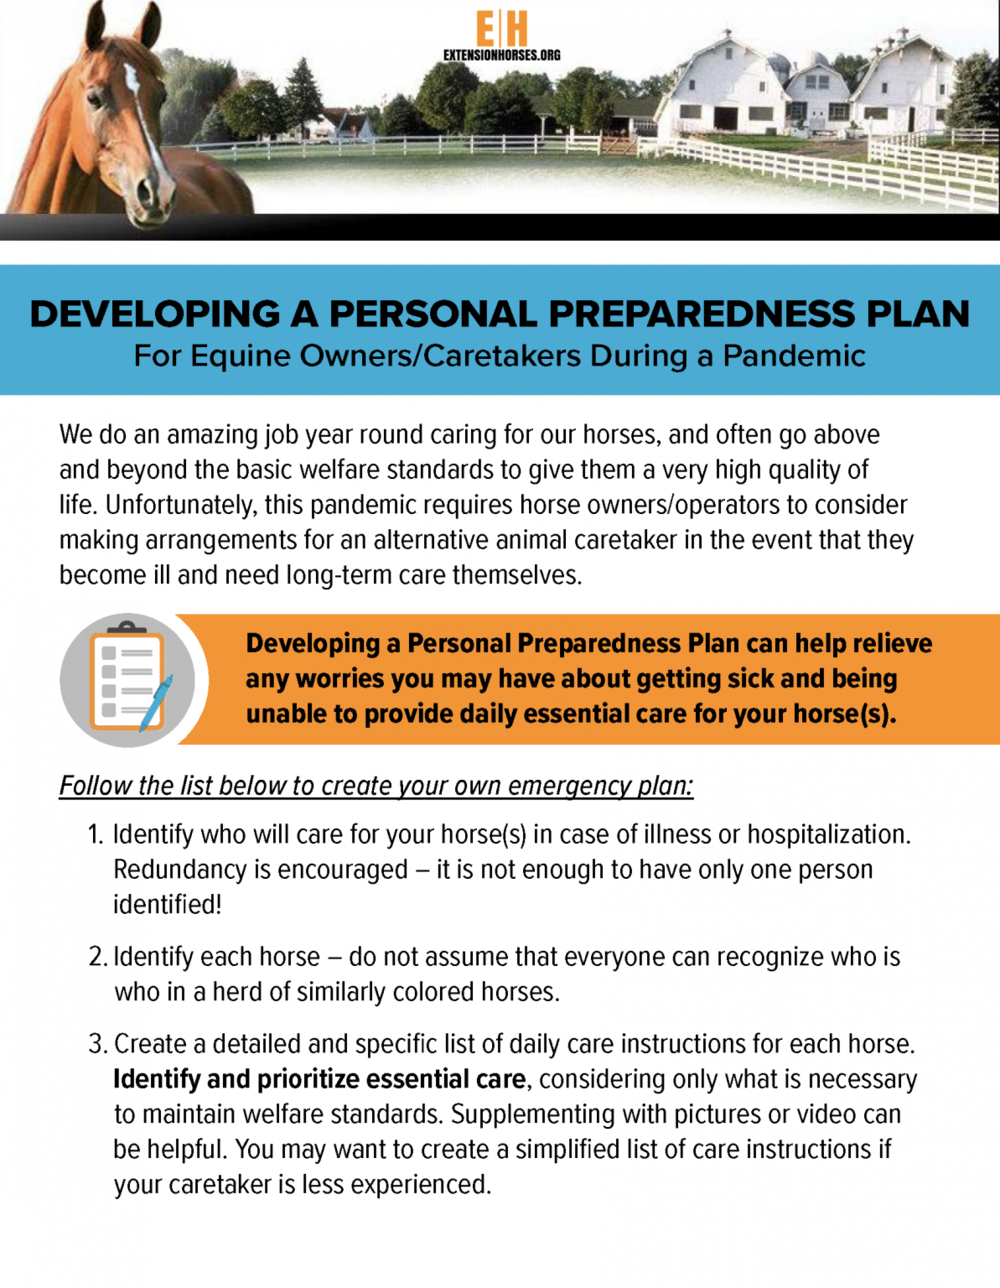 Personal-Preparedness-Plan-for-Equine-Owners_Page_1-1193x1536.png